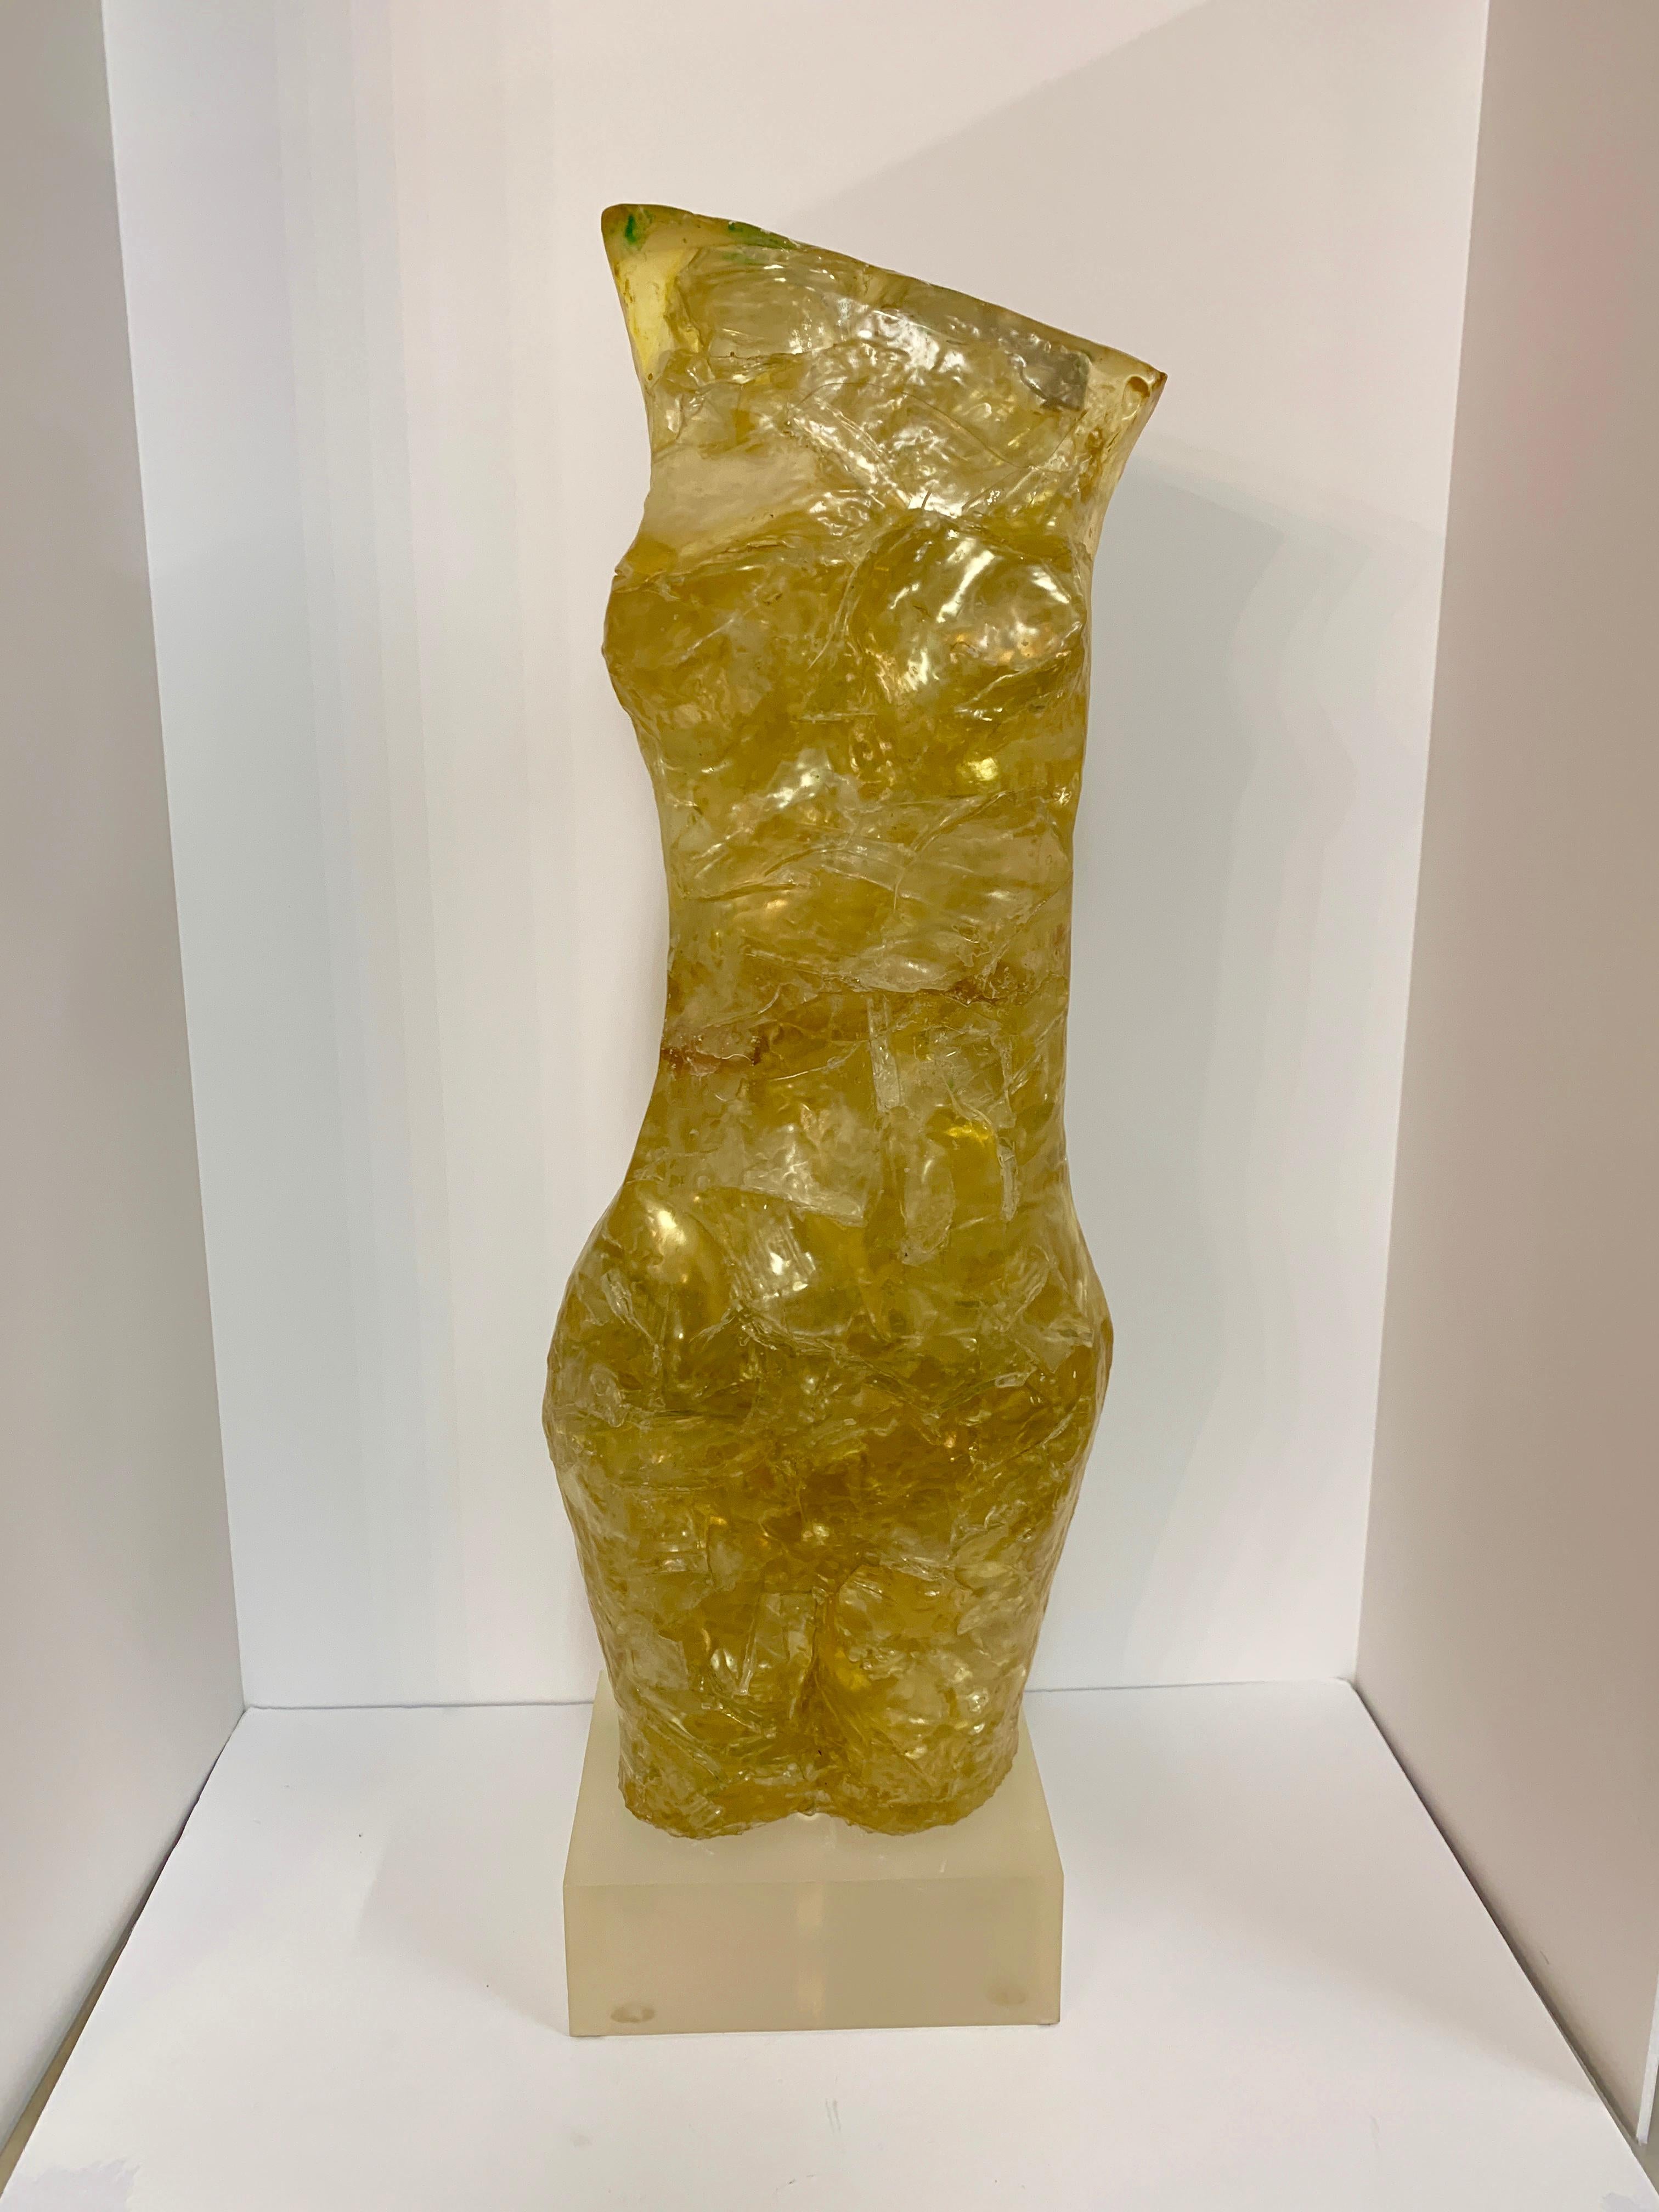 A quite stunning Fractal Resin sculpture of a nude female torso mounted on an acrylic base. The sculpture appears to have glass and other materials in it as well. It is not permanently affixed to the base but sits on a dowel into the base. The sides